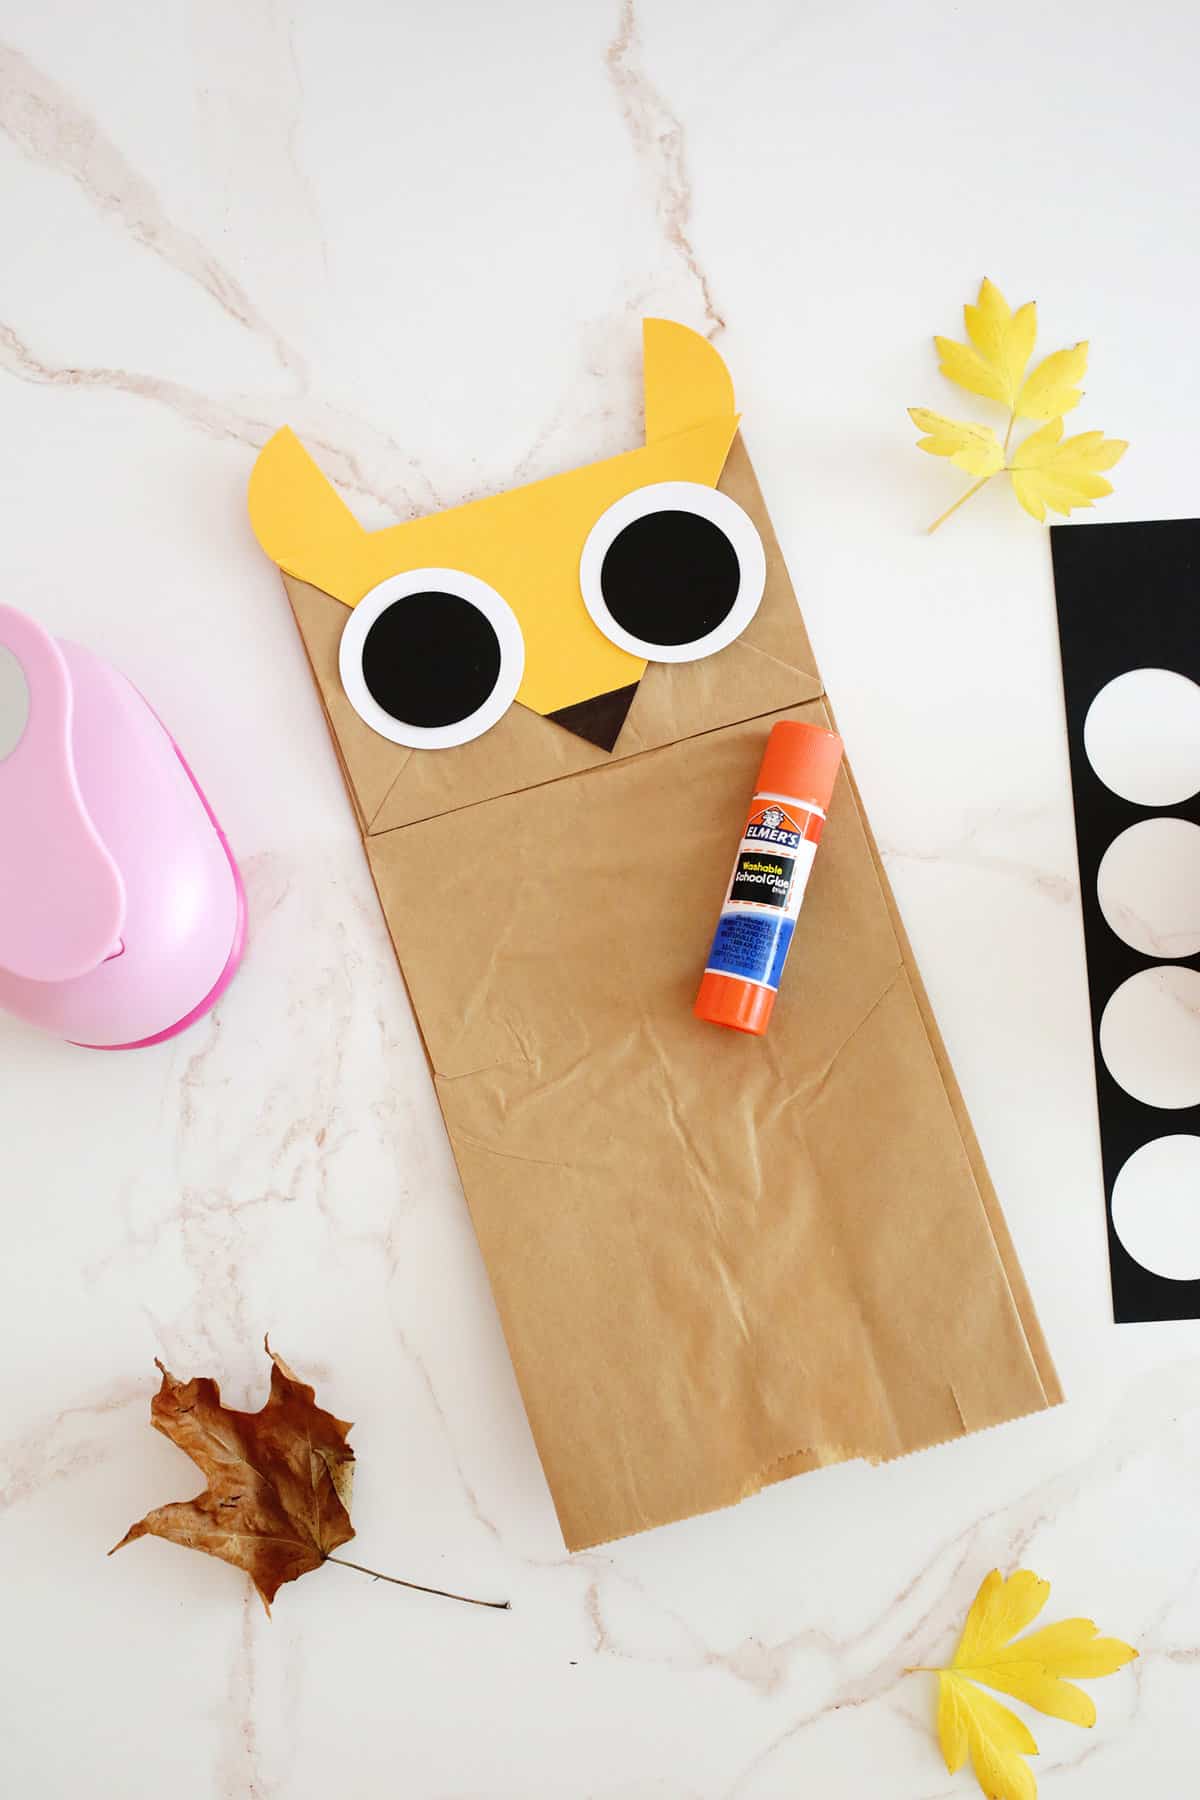 Glue stick sitting on brown paper bag with paper shapes to look like an owl. 